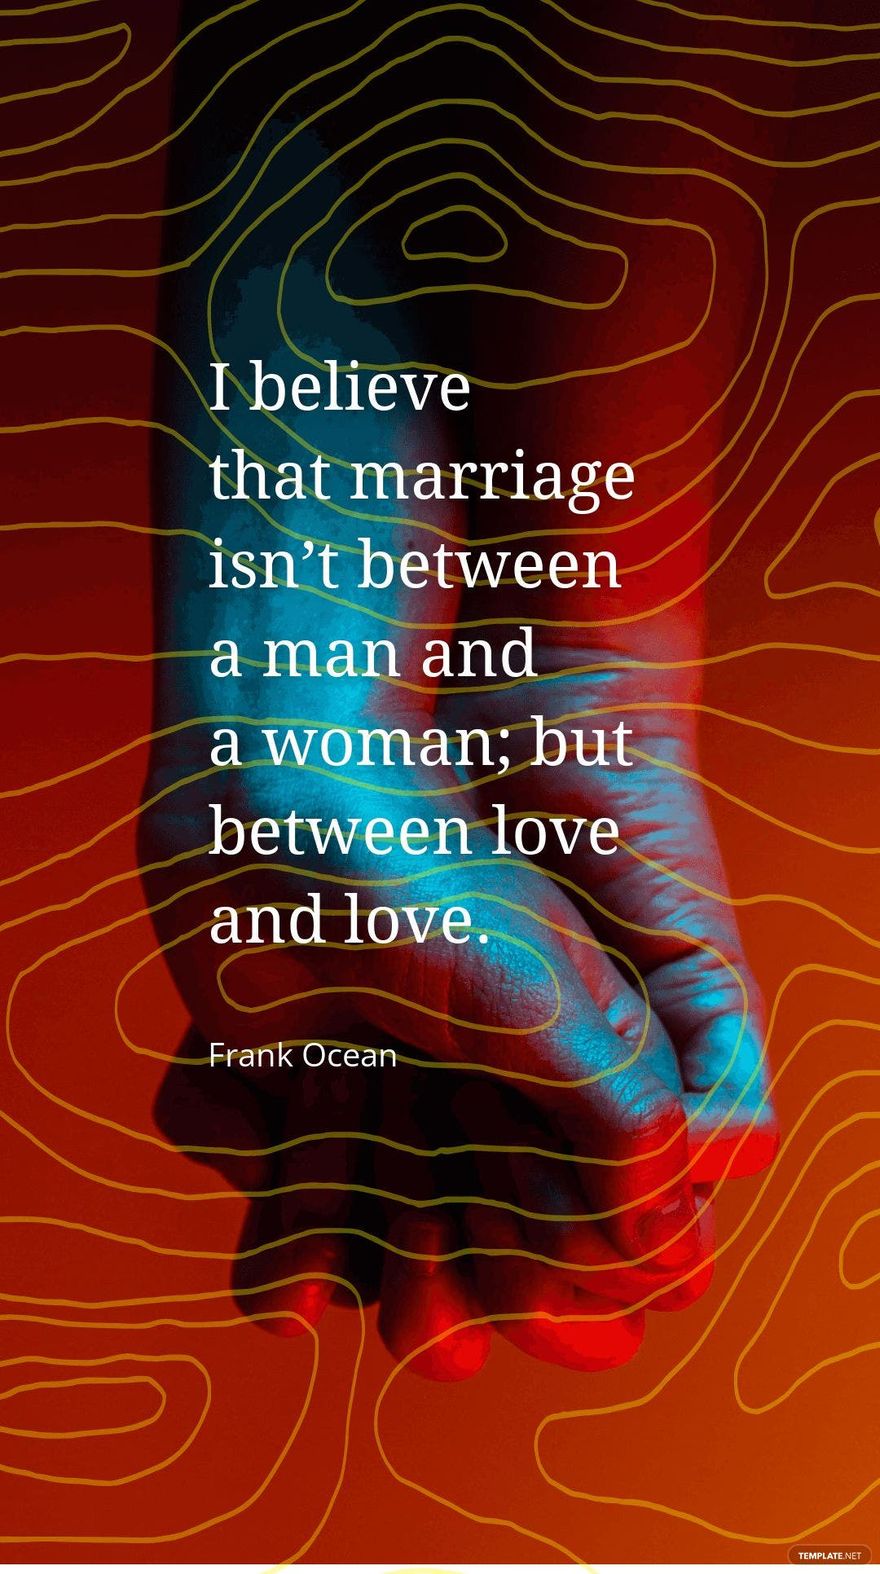 Frank Ocean - I believe that marriage isn’t between a man and a woman; but between love and love.